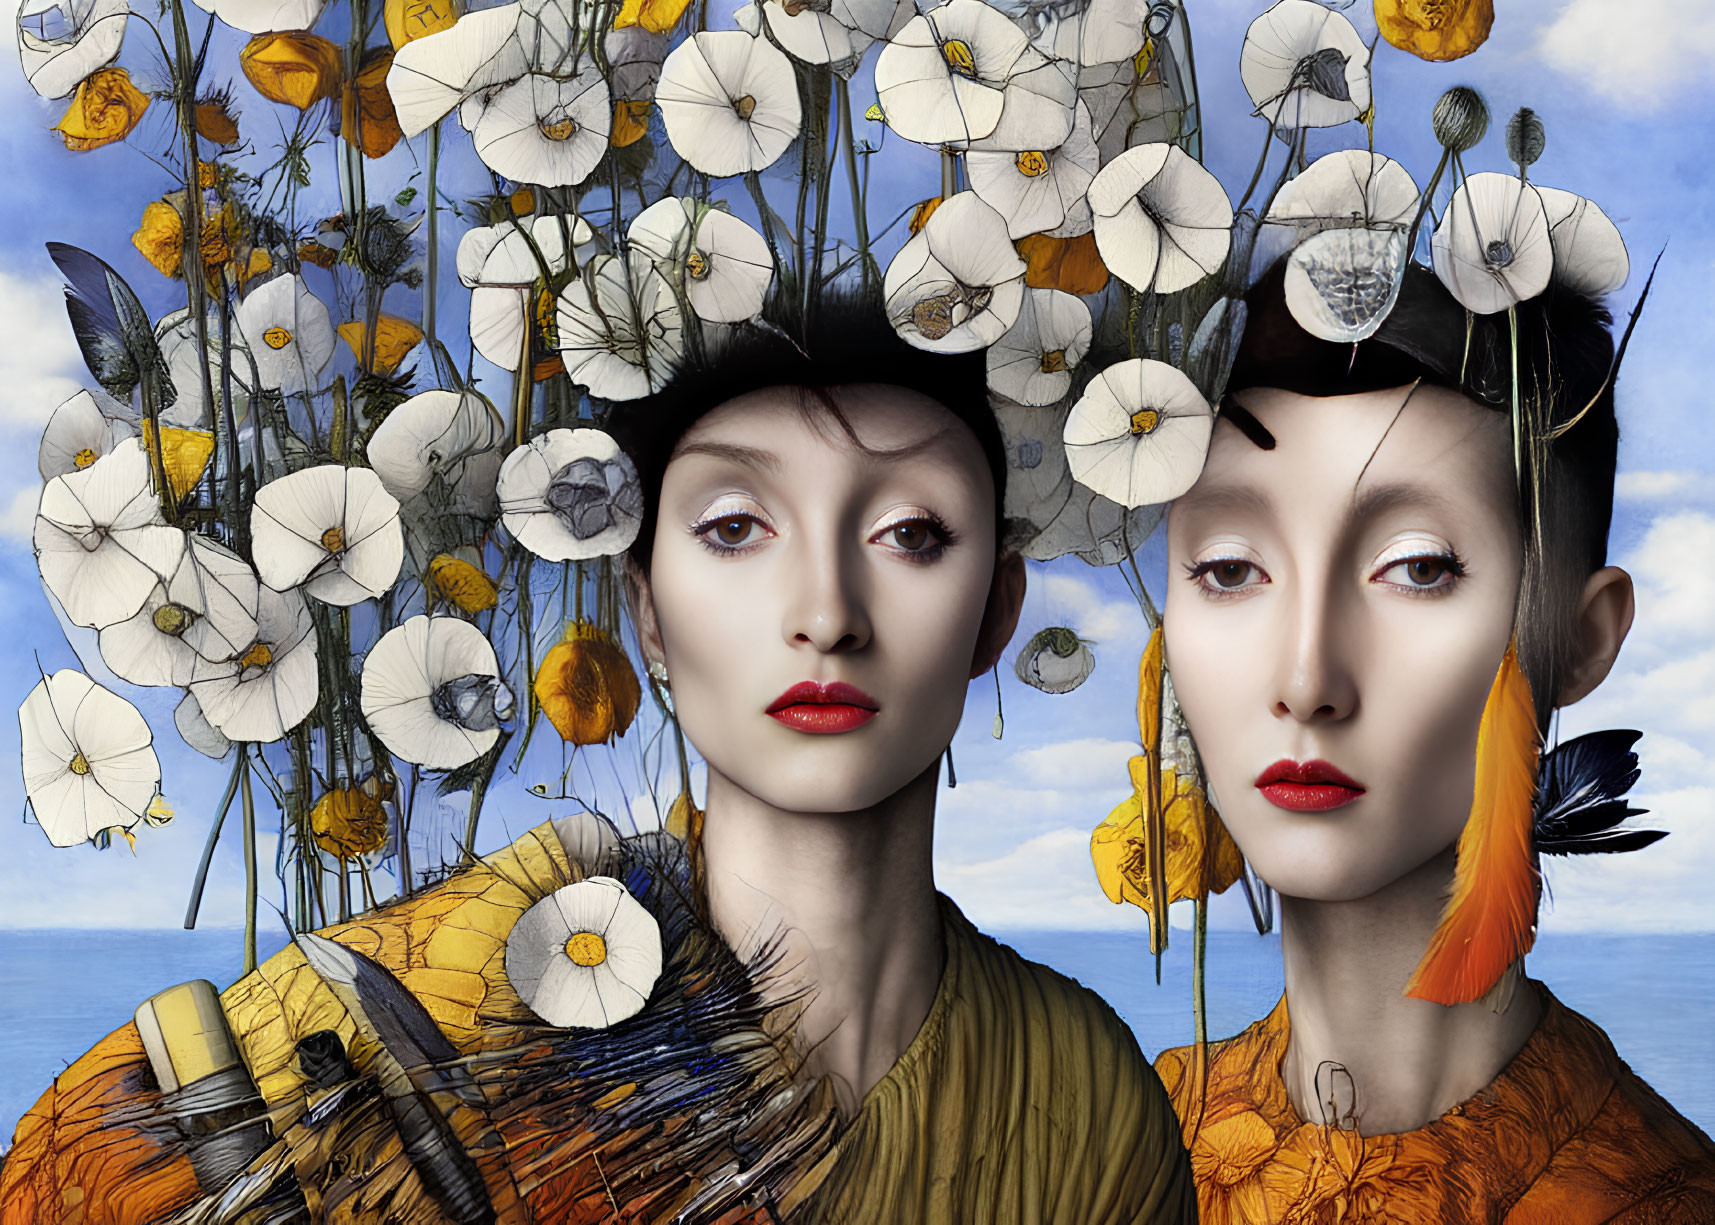 Surreal female figures with floral and bird-like elements in cloudy sky setting